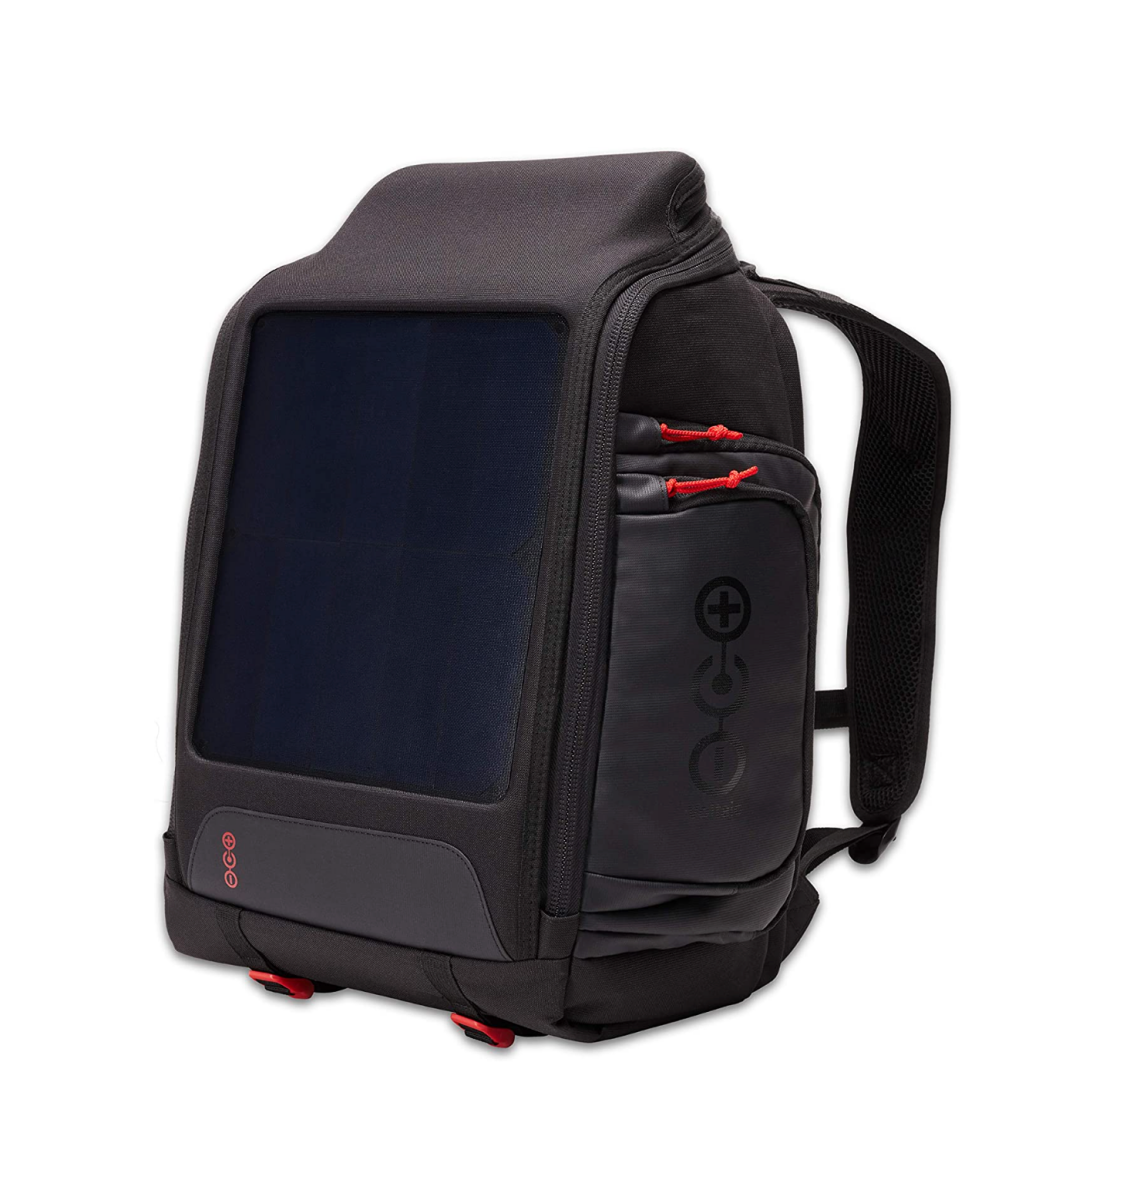 A Voltaic Systems OffGrid Solar Backpack Charger